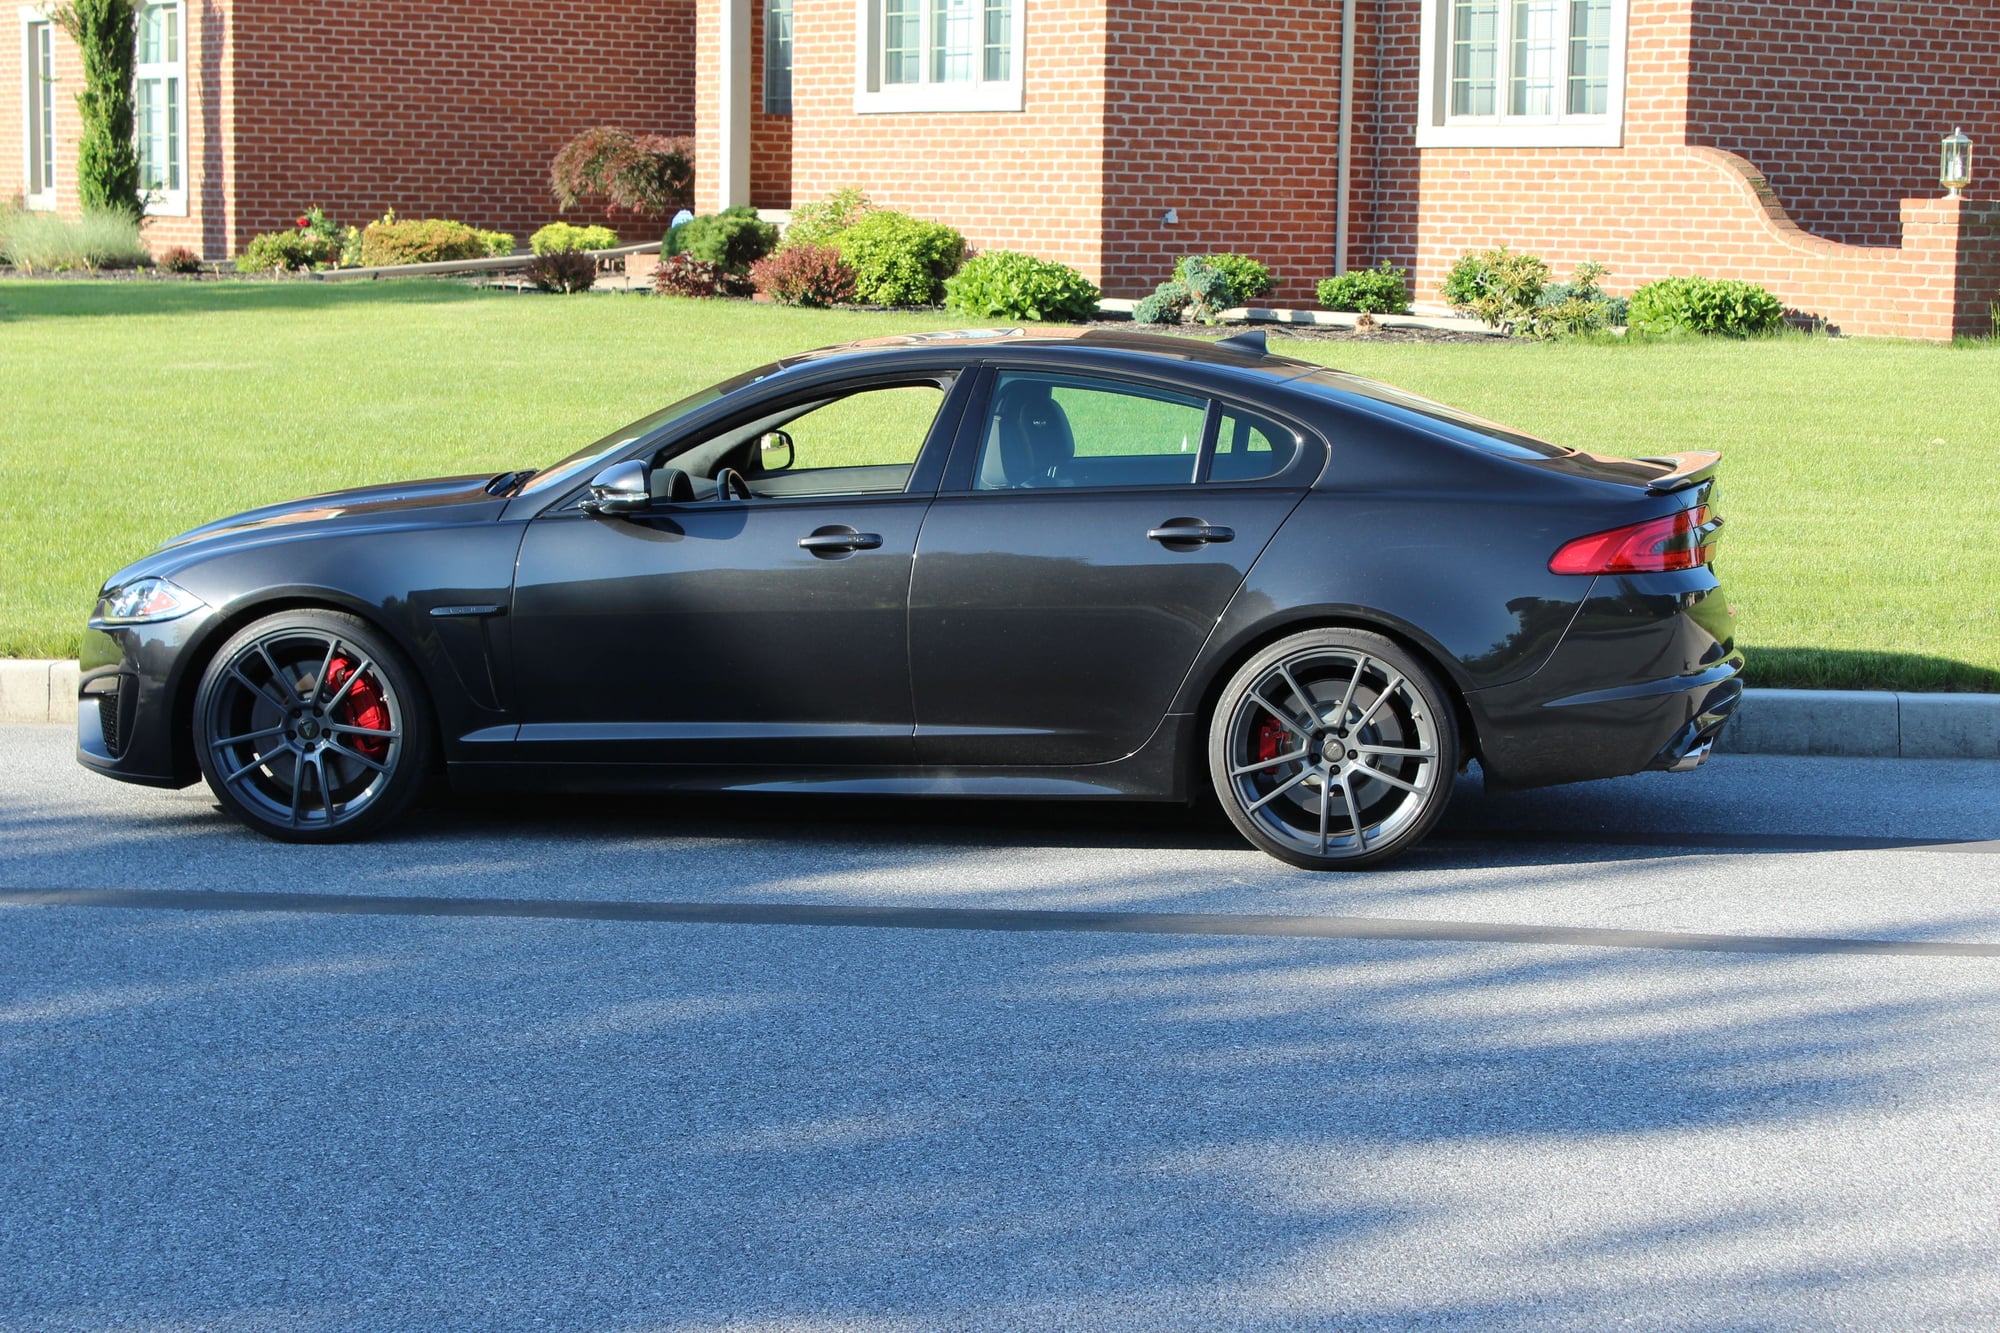 Wheels and Tires/Axles - Vorsteiner 21" 10.5" rear 9" front $1750.00 free freight in USA - Used - 2010 to 2015 Jaguar XFR - Hershey, PA 17033, United States